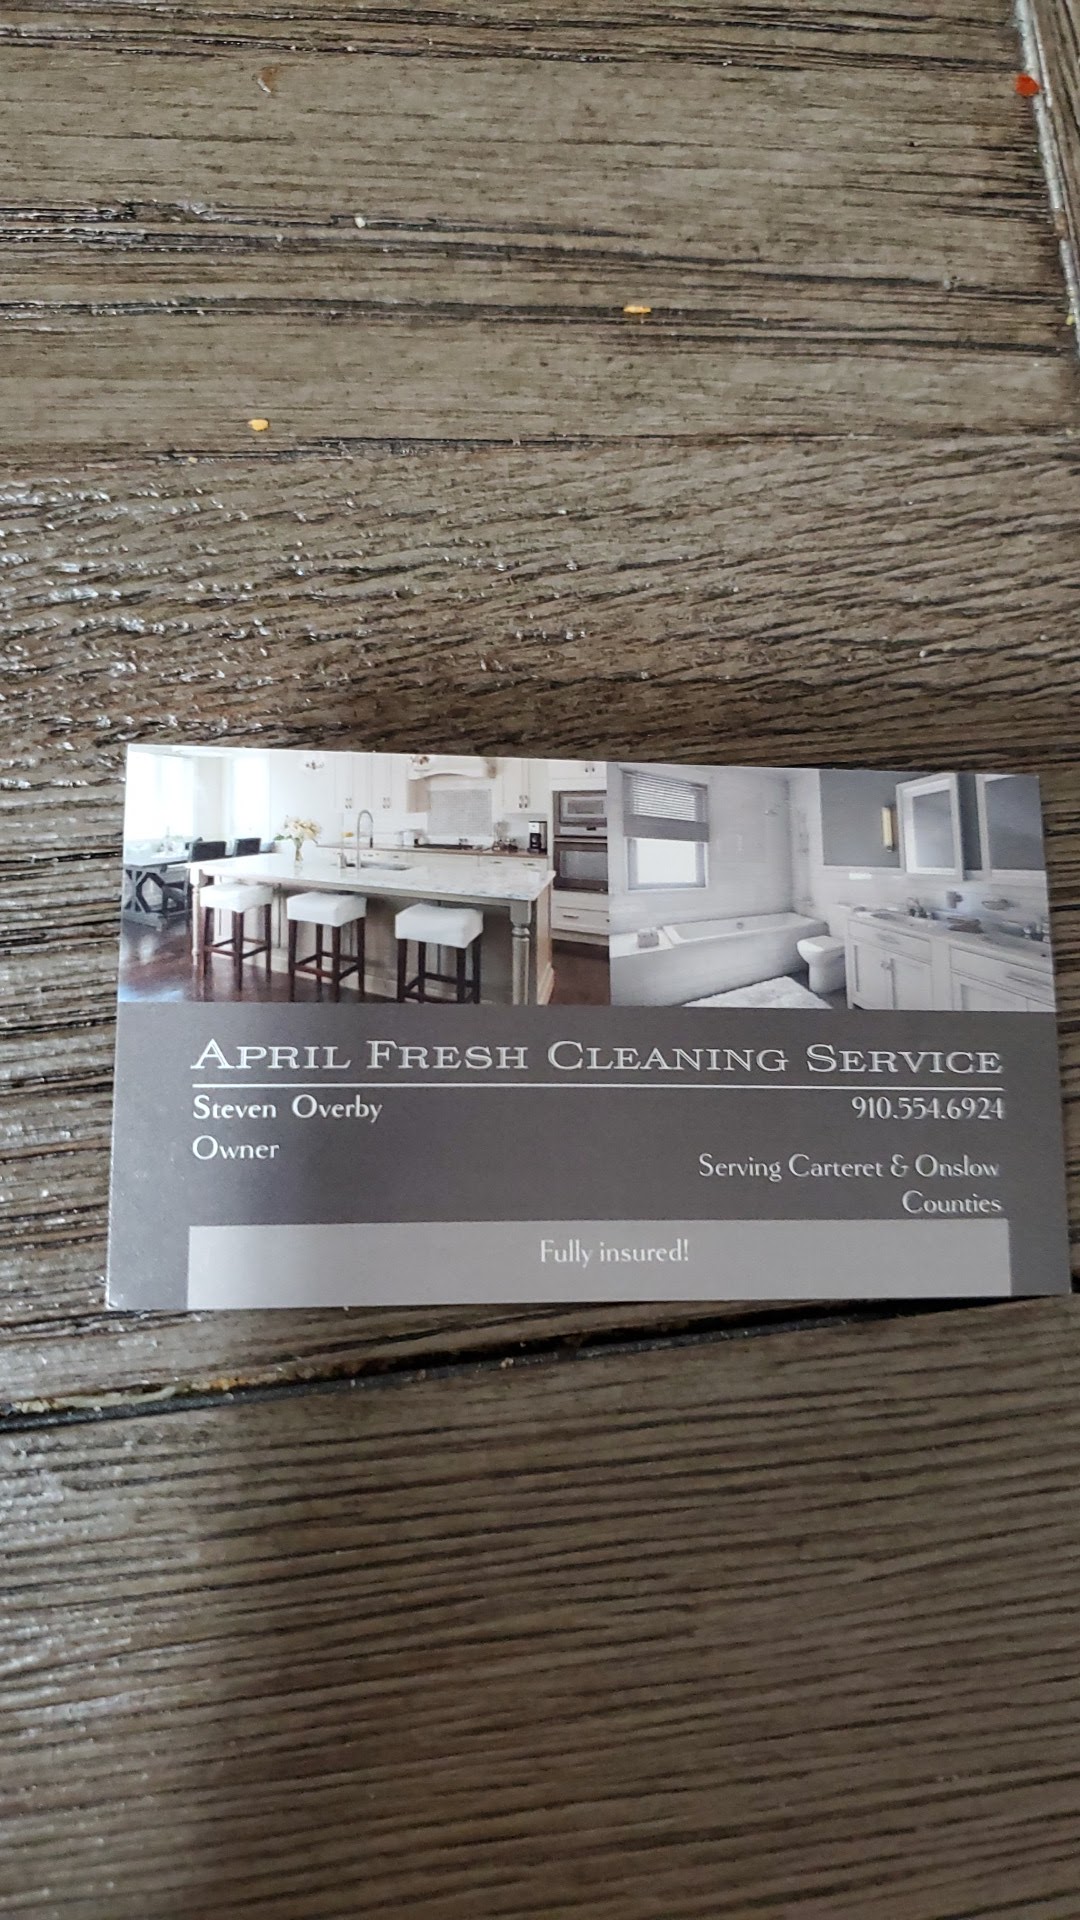 April Fresh Cleaning Service